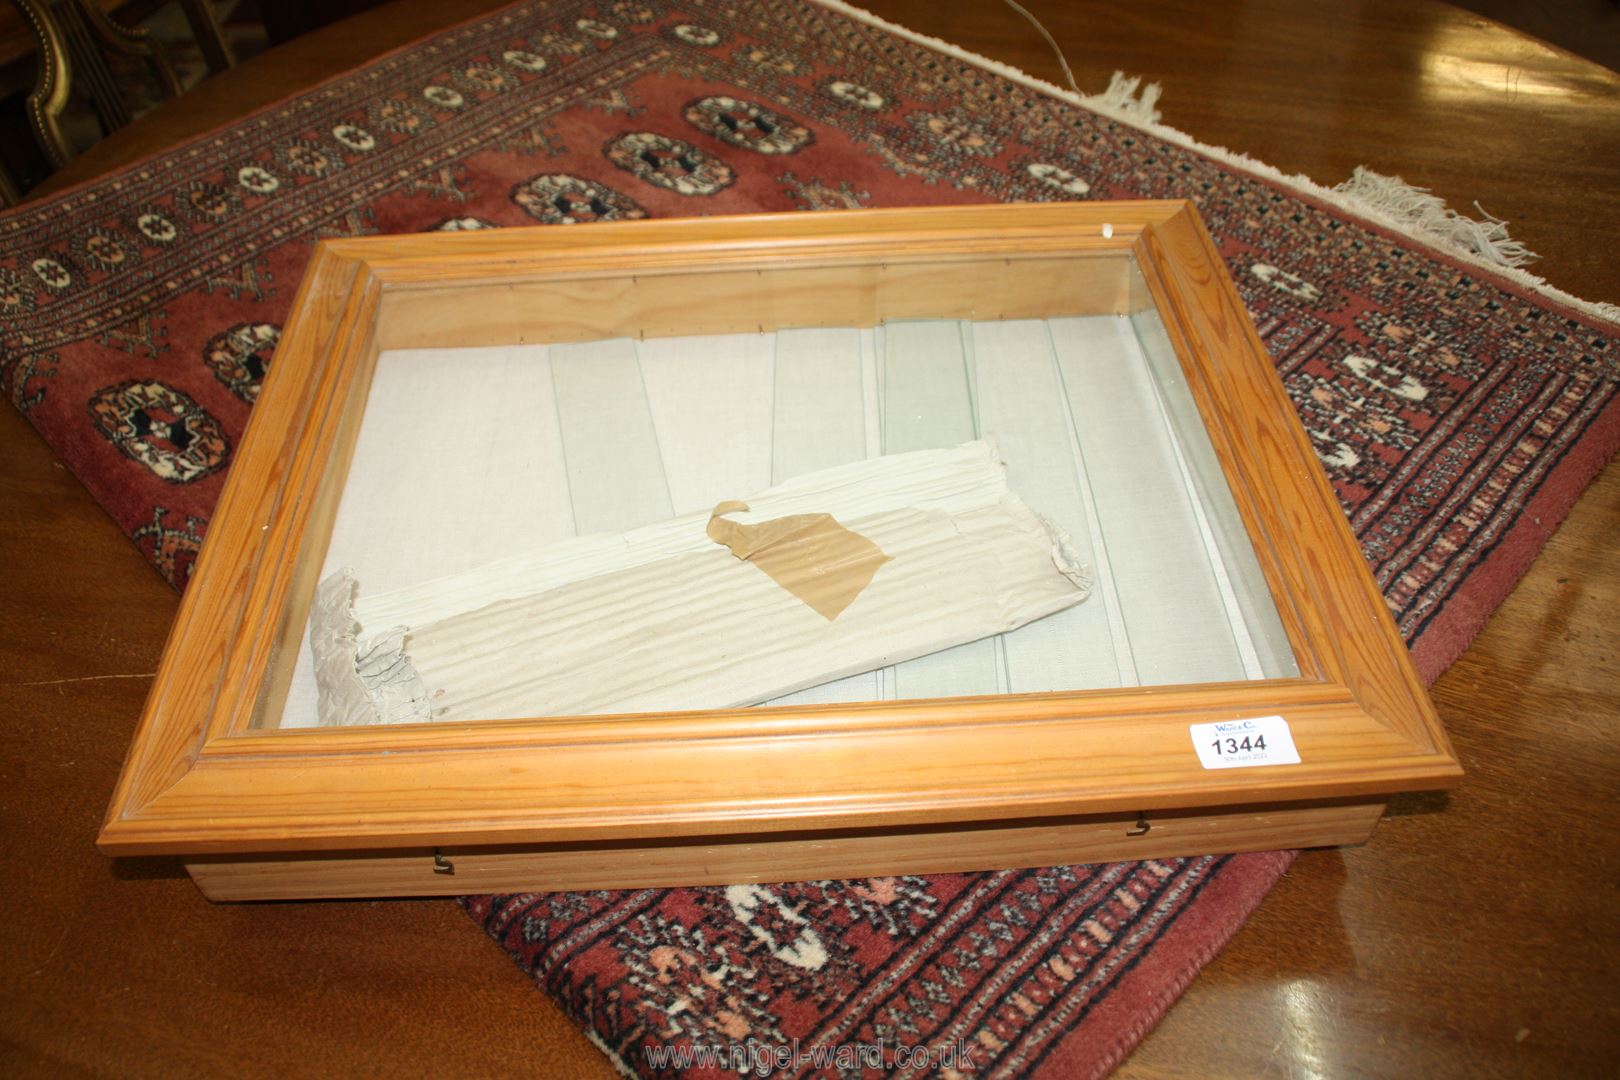 A wall mounted Display Cabinet with glass shelves, 20 1/2" x 16 1/2" x 3" deep.